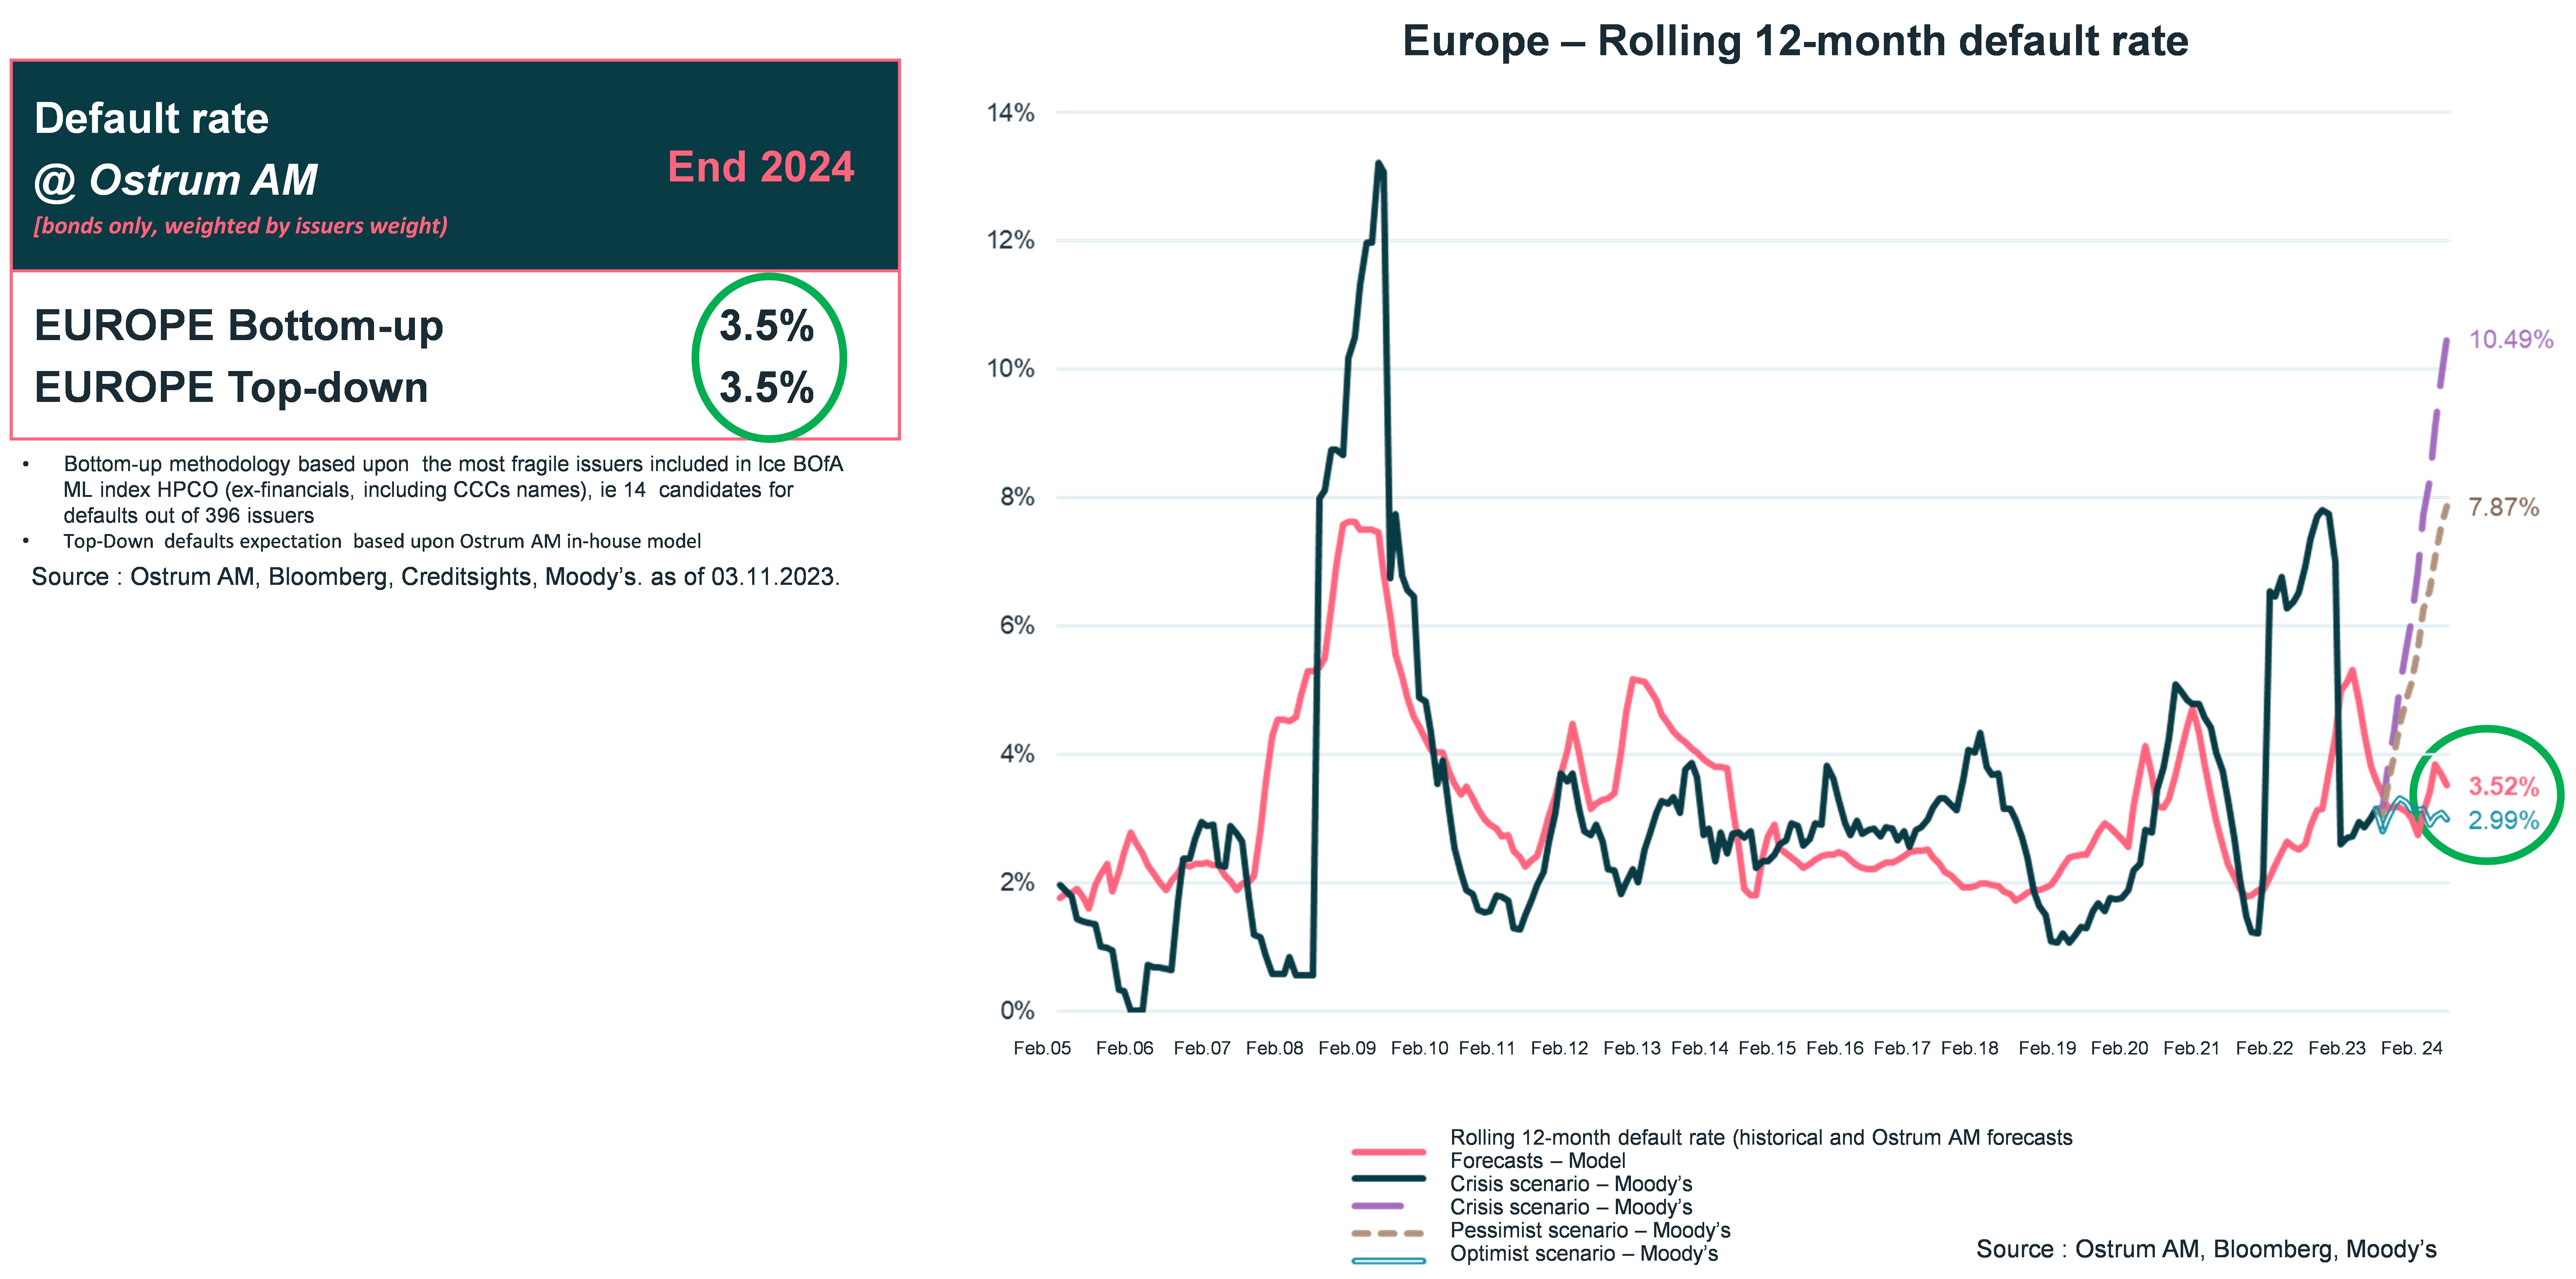 defaut-rate-@-ostrum-am-and-europe-rolling-12-months-default-rate